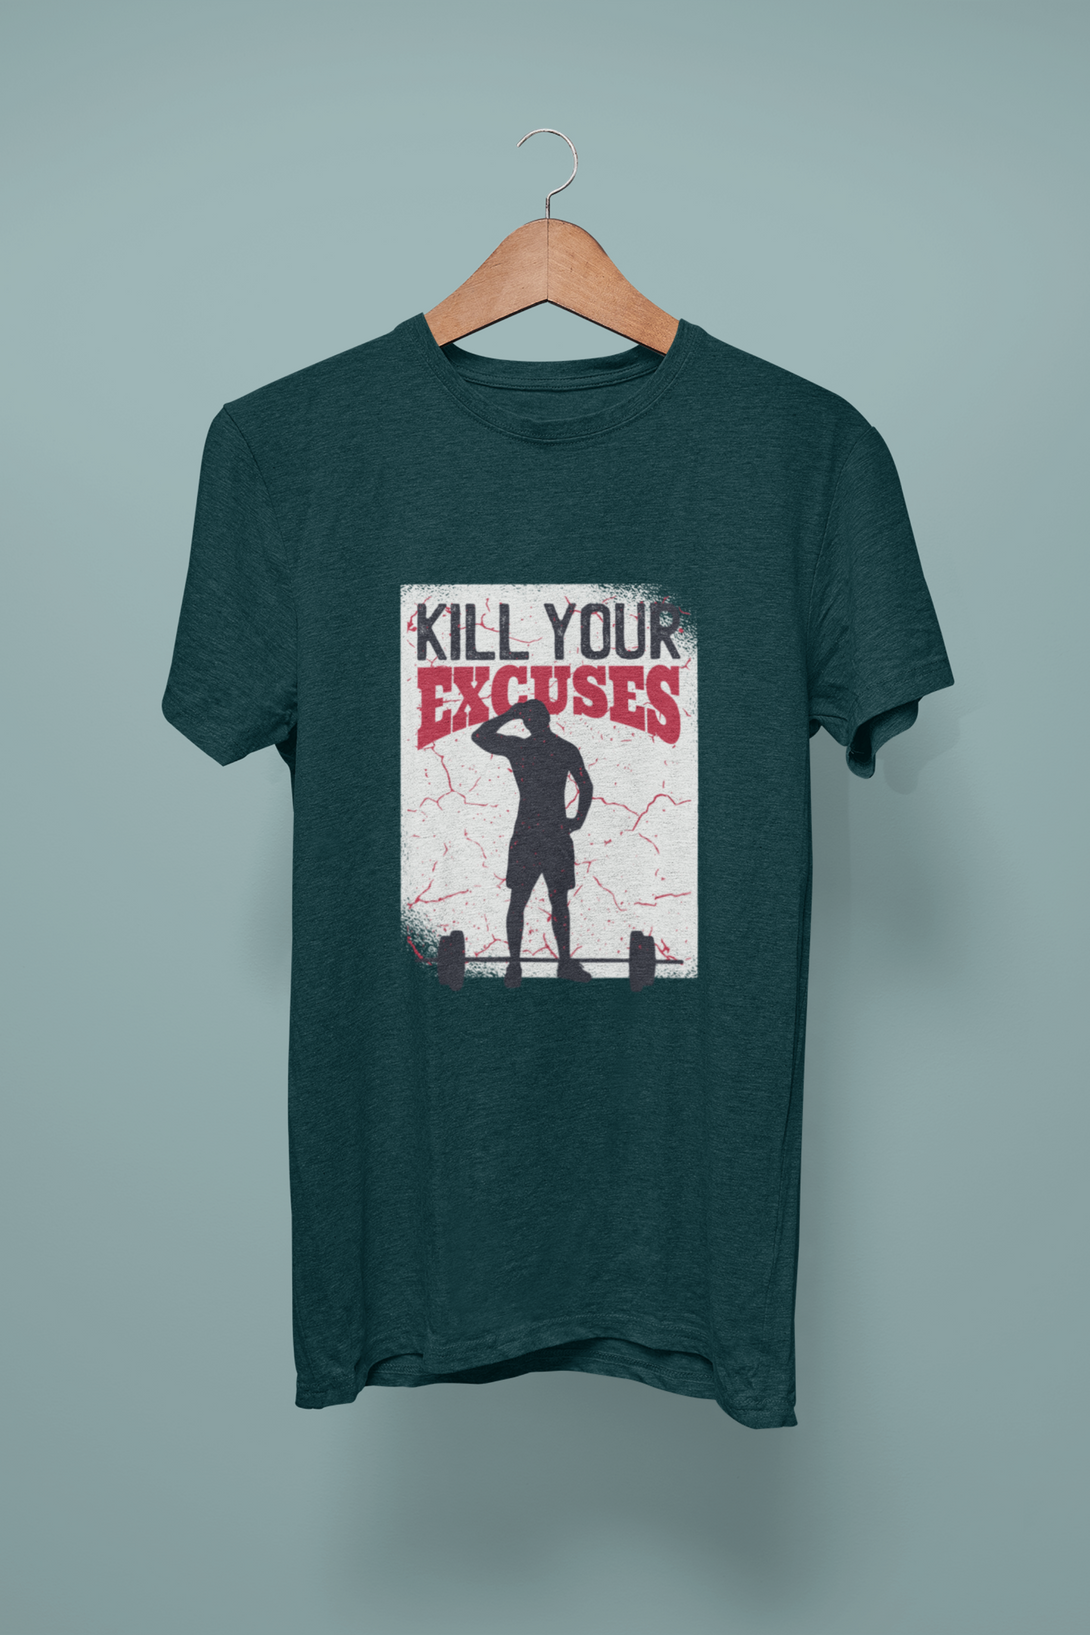 Kill Your Excuses Printed Oversized T-Shirt For Men - WowWaves - 6